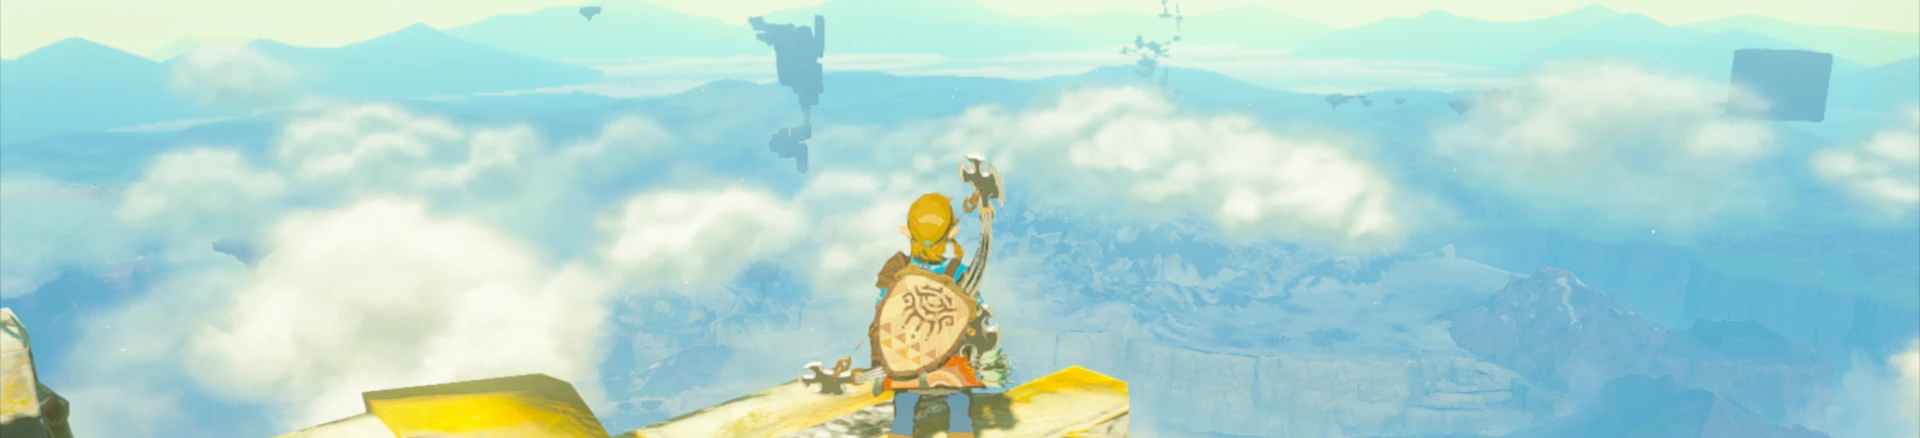 Link looking over a cloud-studded landscape in a screenshot captured in Tears of the Kingdom.